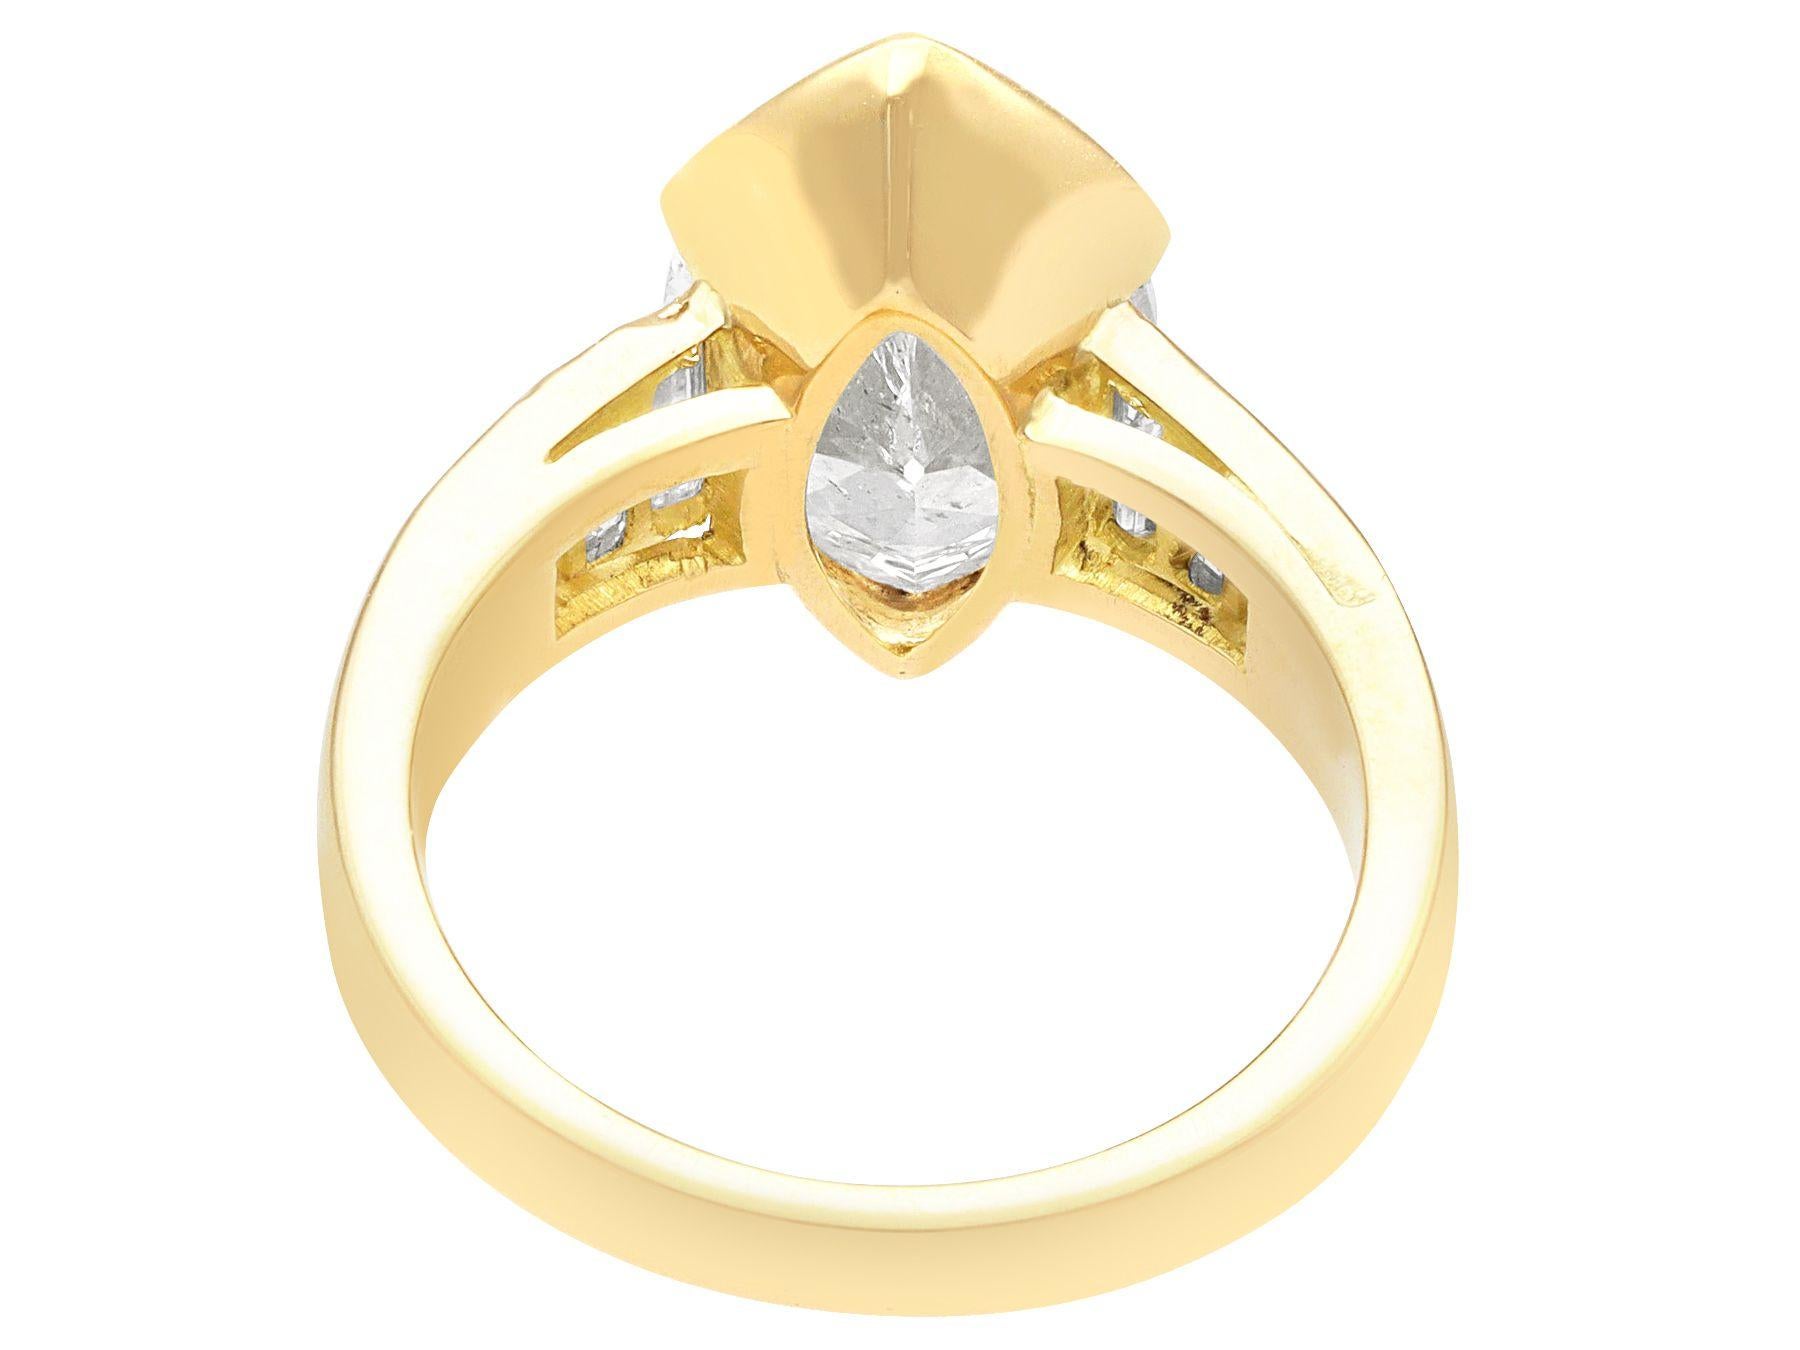 Vintage 3.93 Carat Diamond and Yellow Gold Solitaire Engagement Ring In Excellent Condition For Sale In Jesmond, Newcastle Upon Tyne